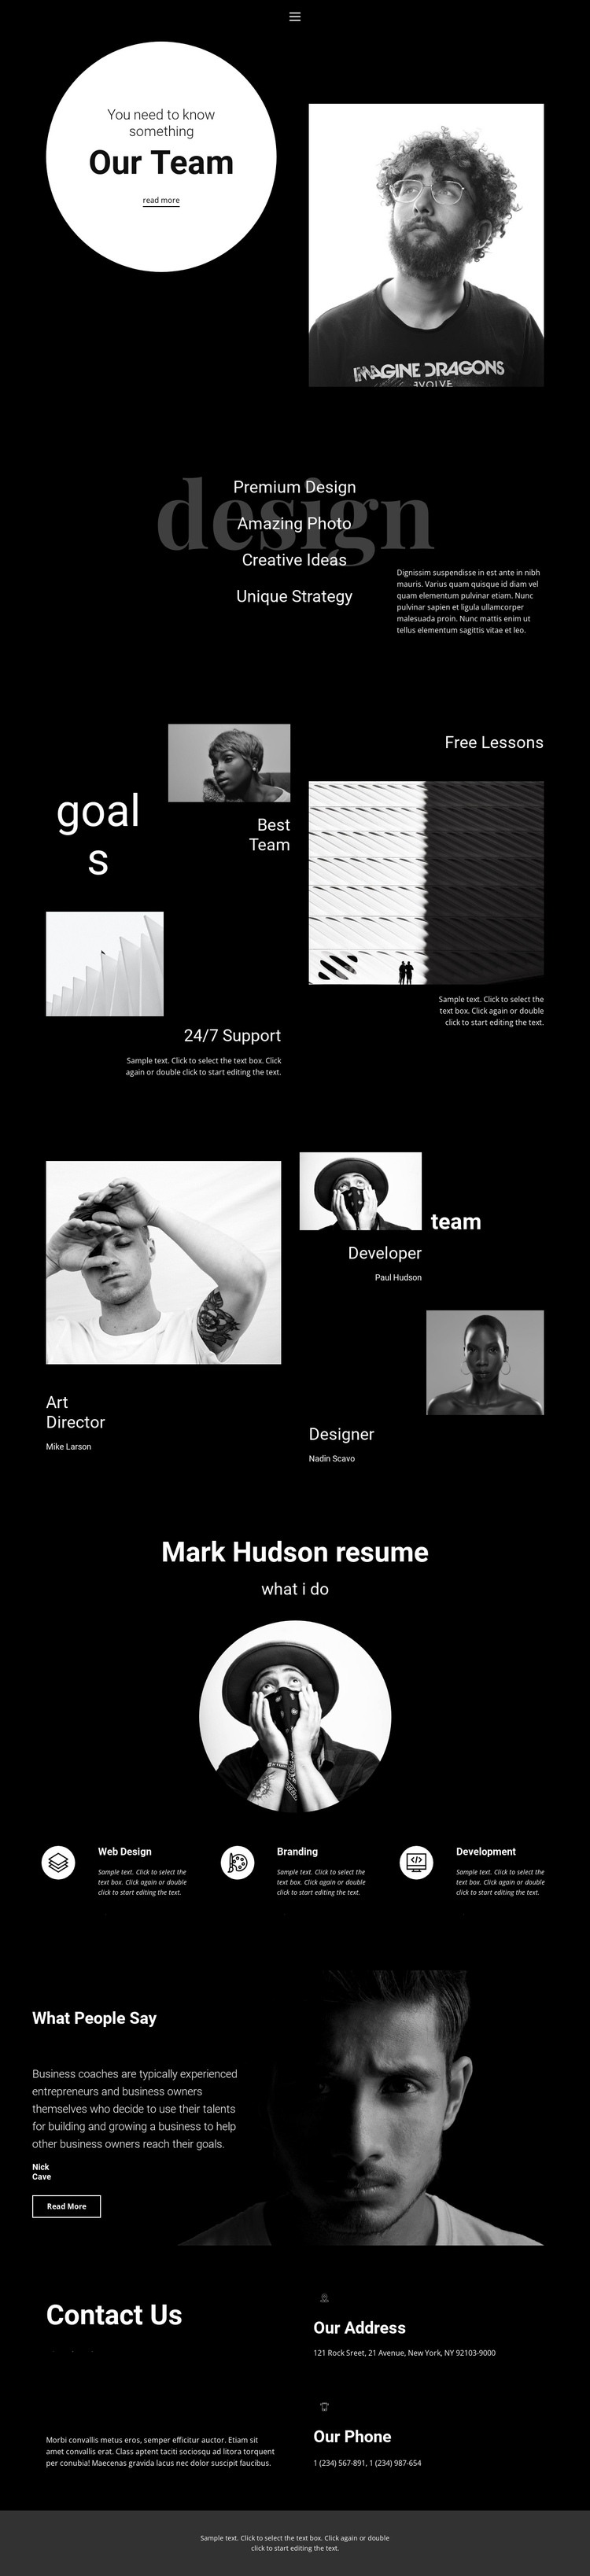 Design and development team One Page Template